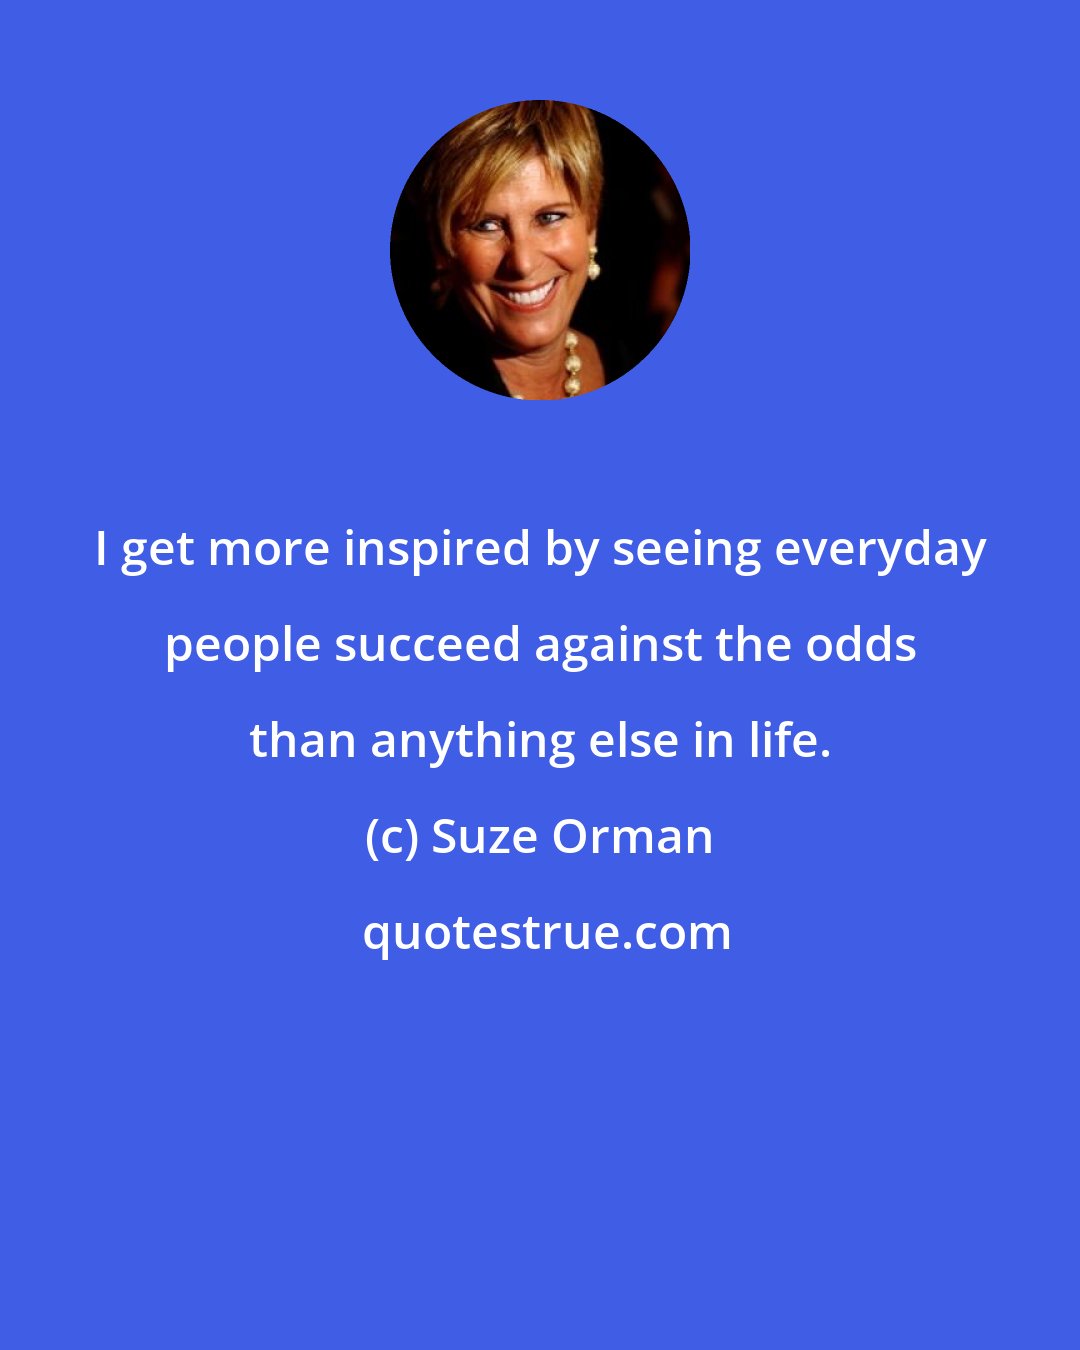 Suze Orman: I get more inspired by seeing everyday people succeed against the odds than anything else in life.